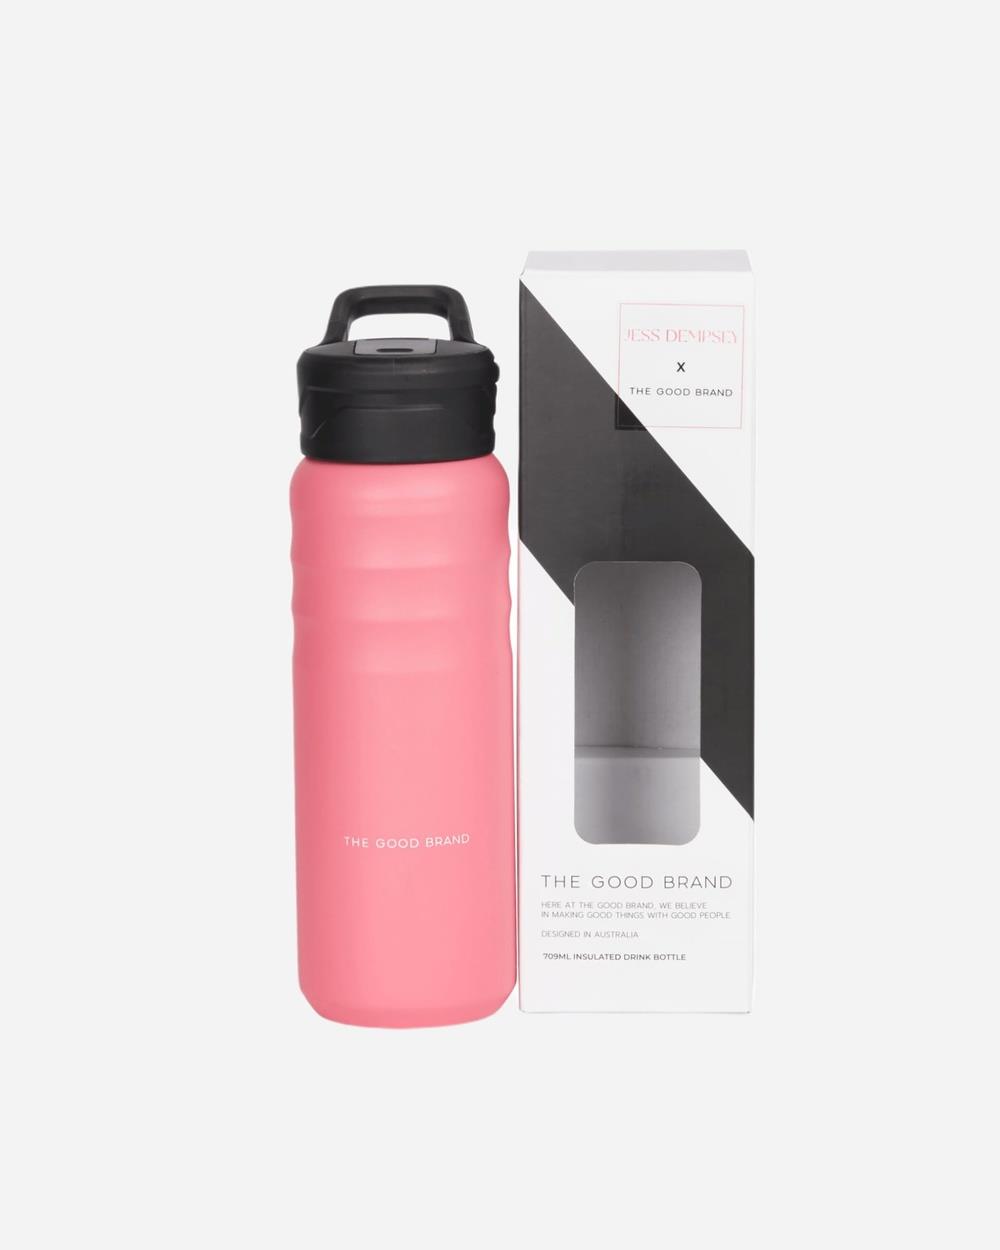 The Good BRAND - Large Insulated Drink Bottle - Home (HOT PINK) Large Insulated Drink Bottle